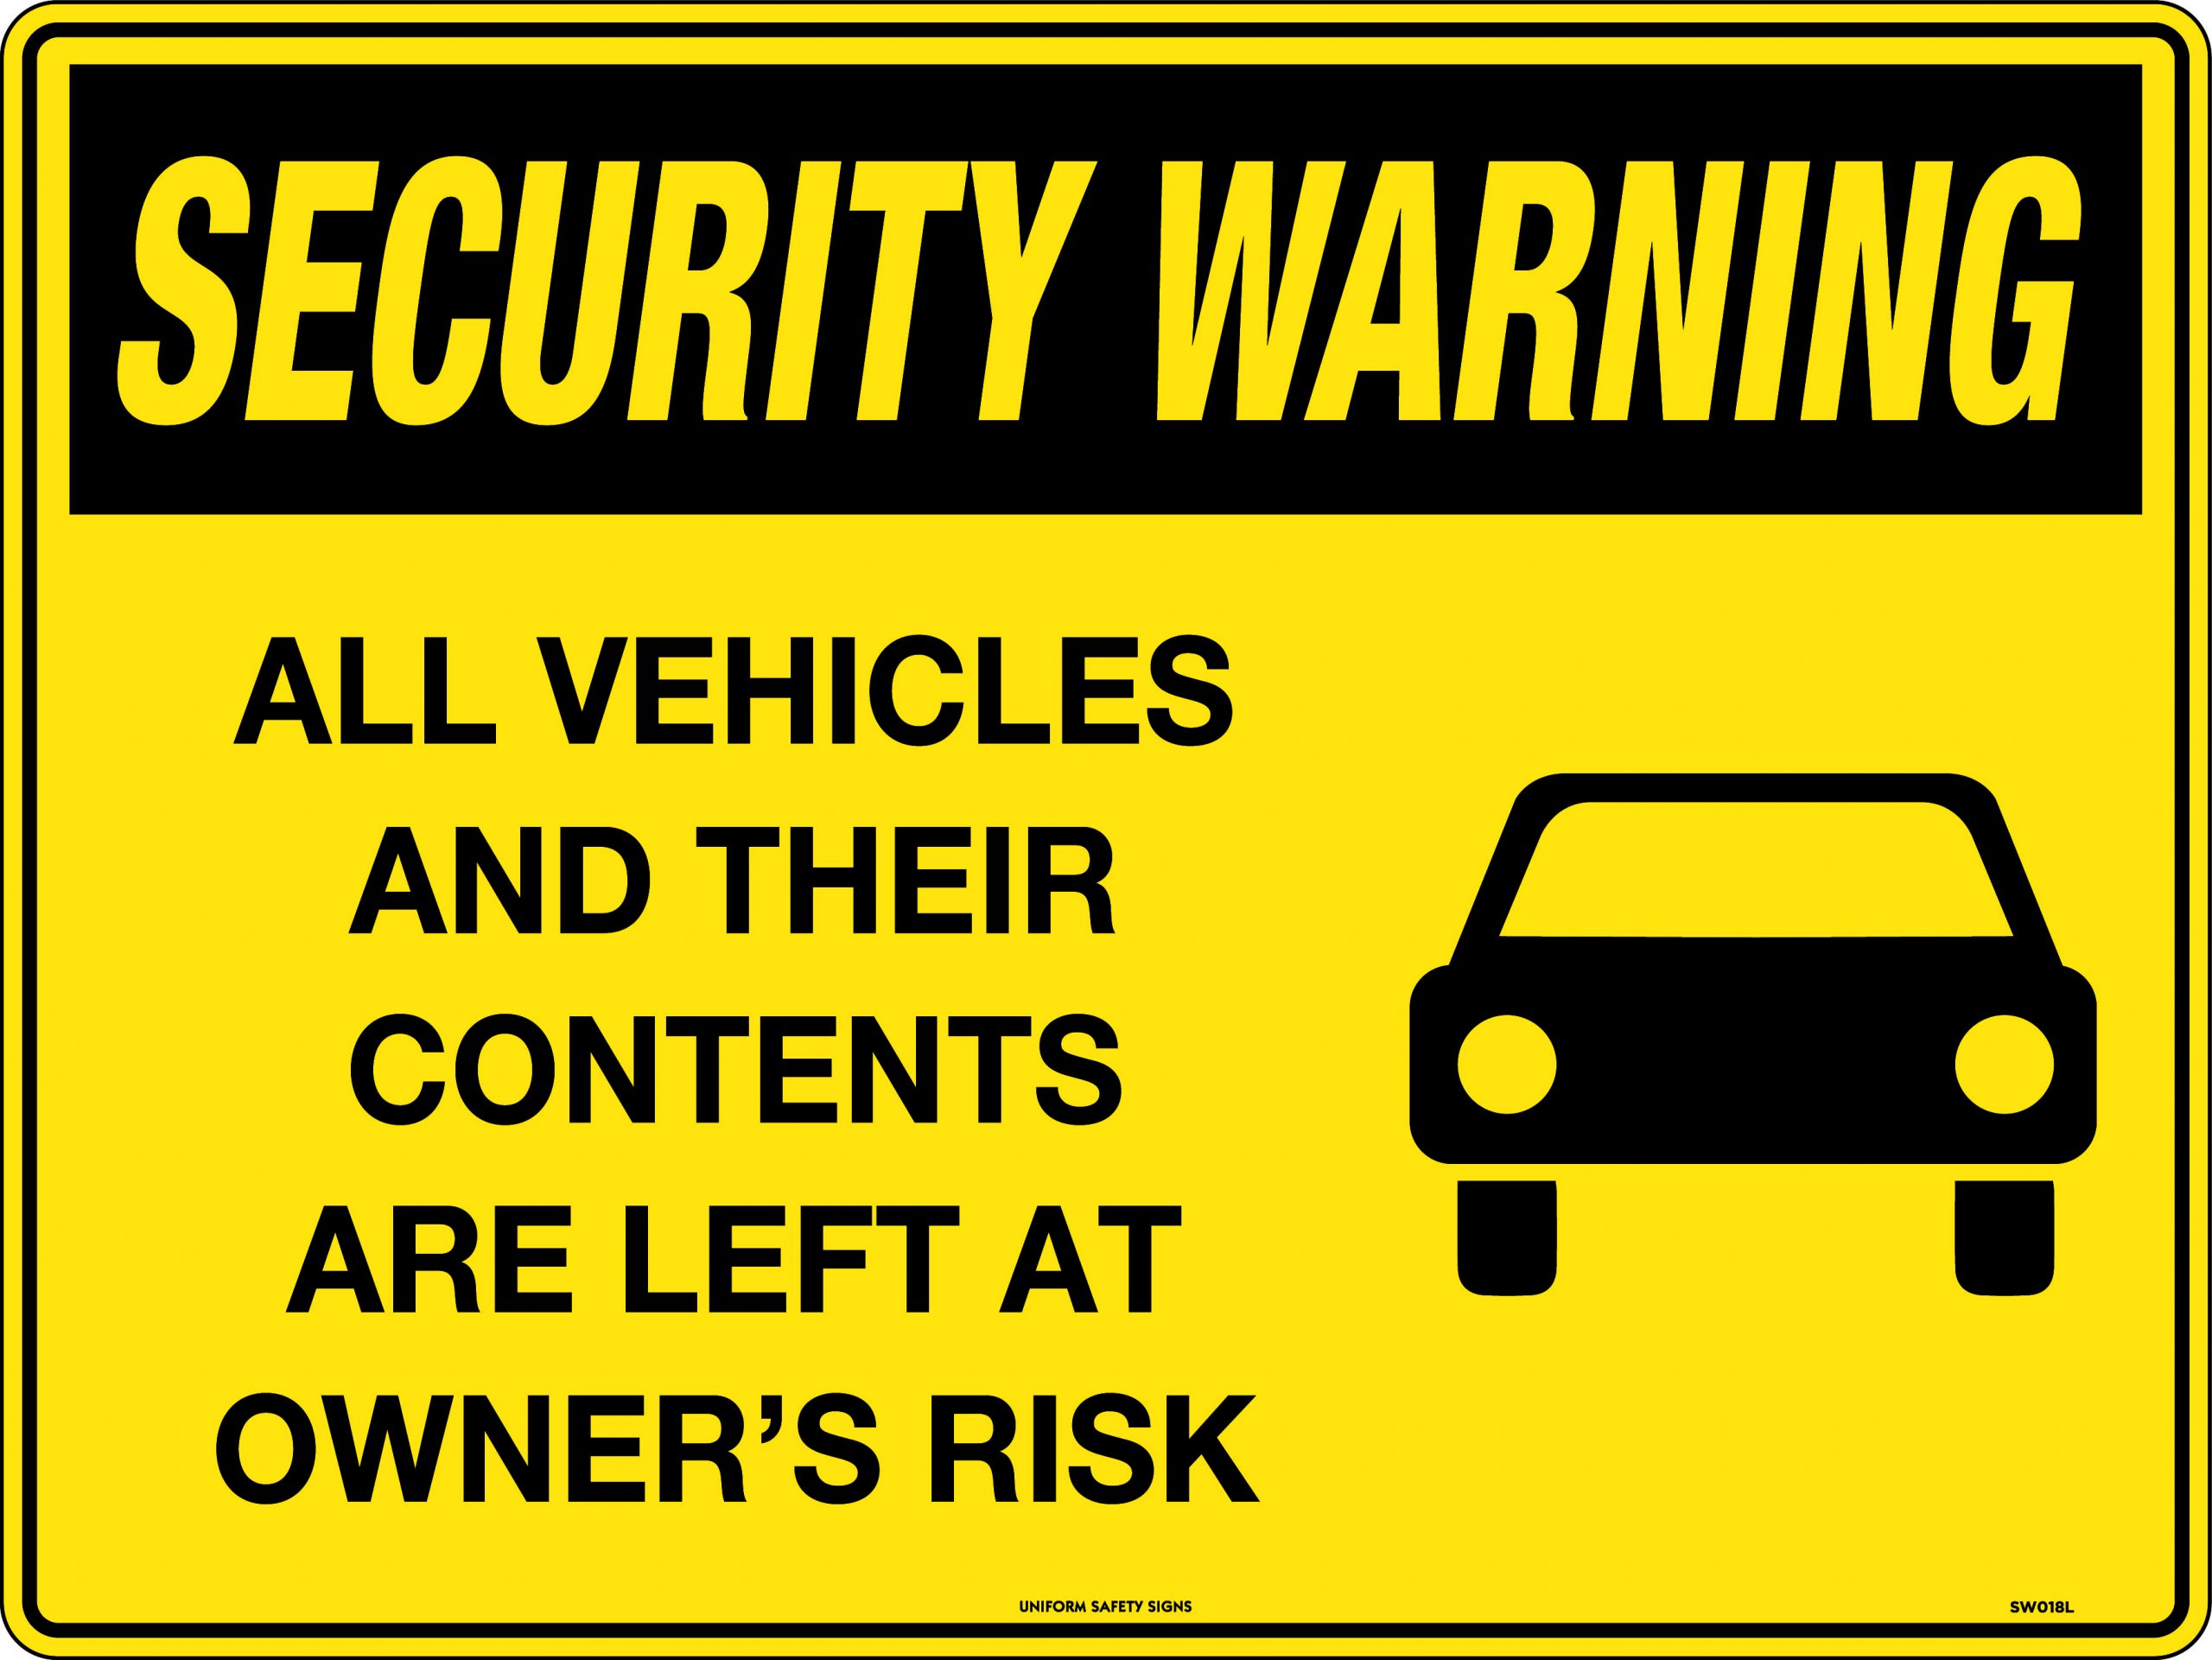 UNIFORM SAFETY 600X450MM POLY SEC WARNING ALL VEHICLES AND THEIR